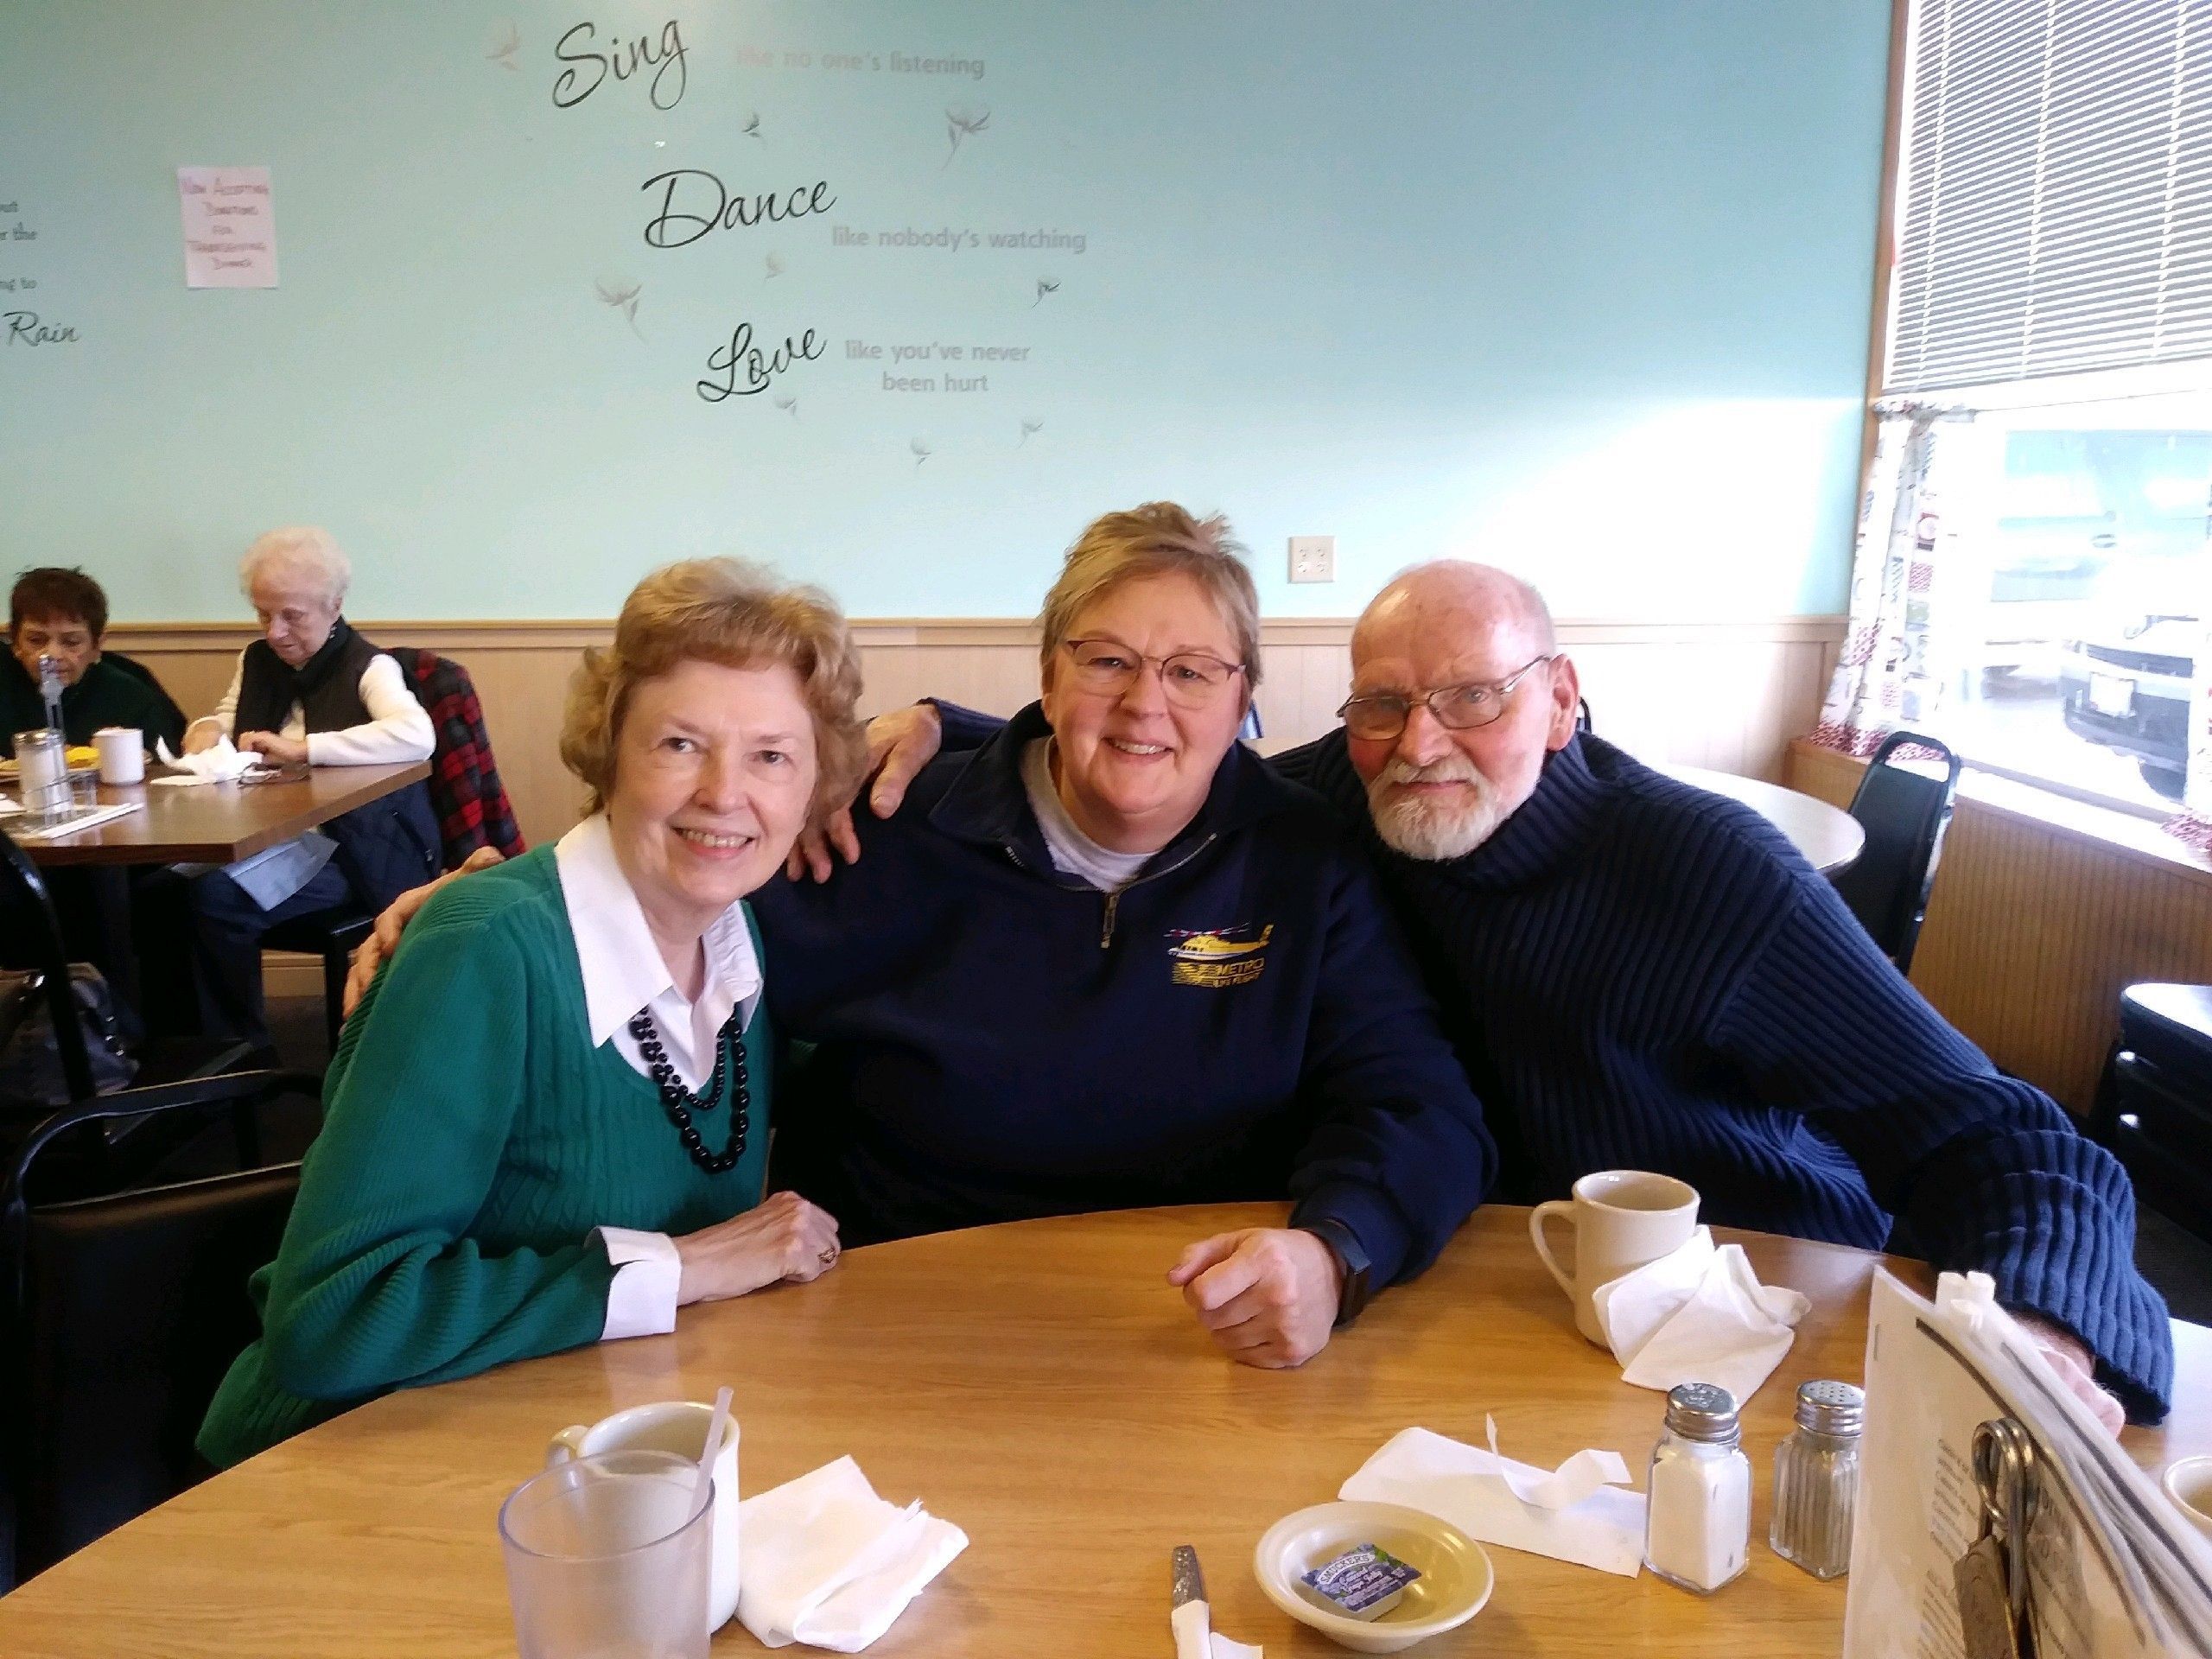 Karen (center) pictured with her sister Carol and her brother Ed.